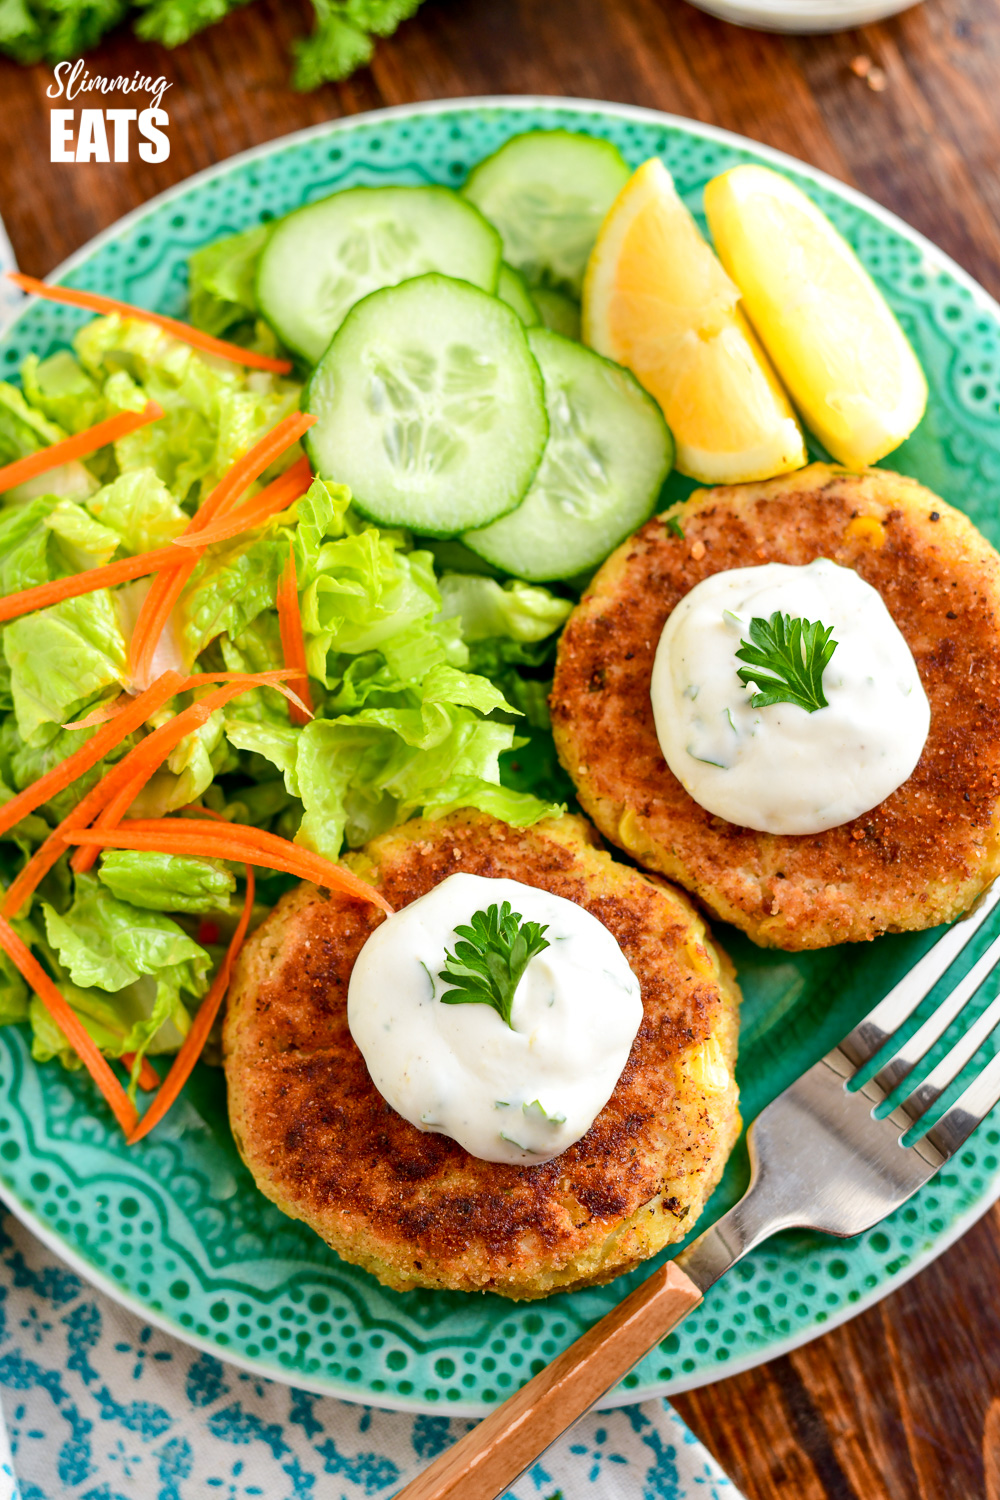 over the top view of low syn crab cakes on a green plate with side salad